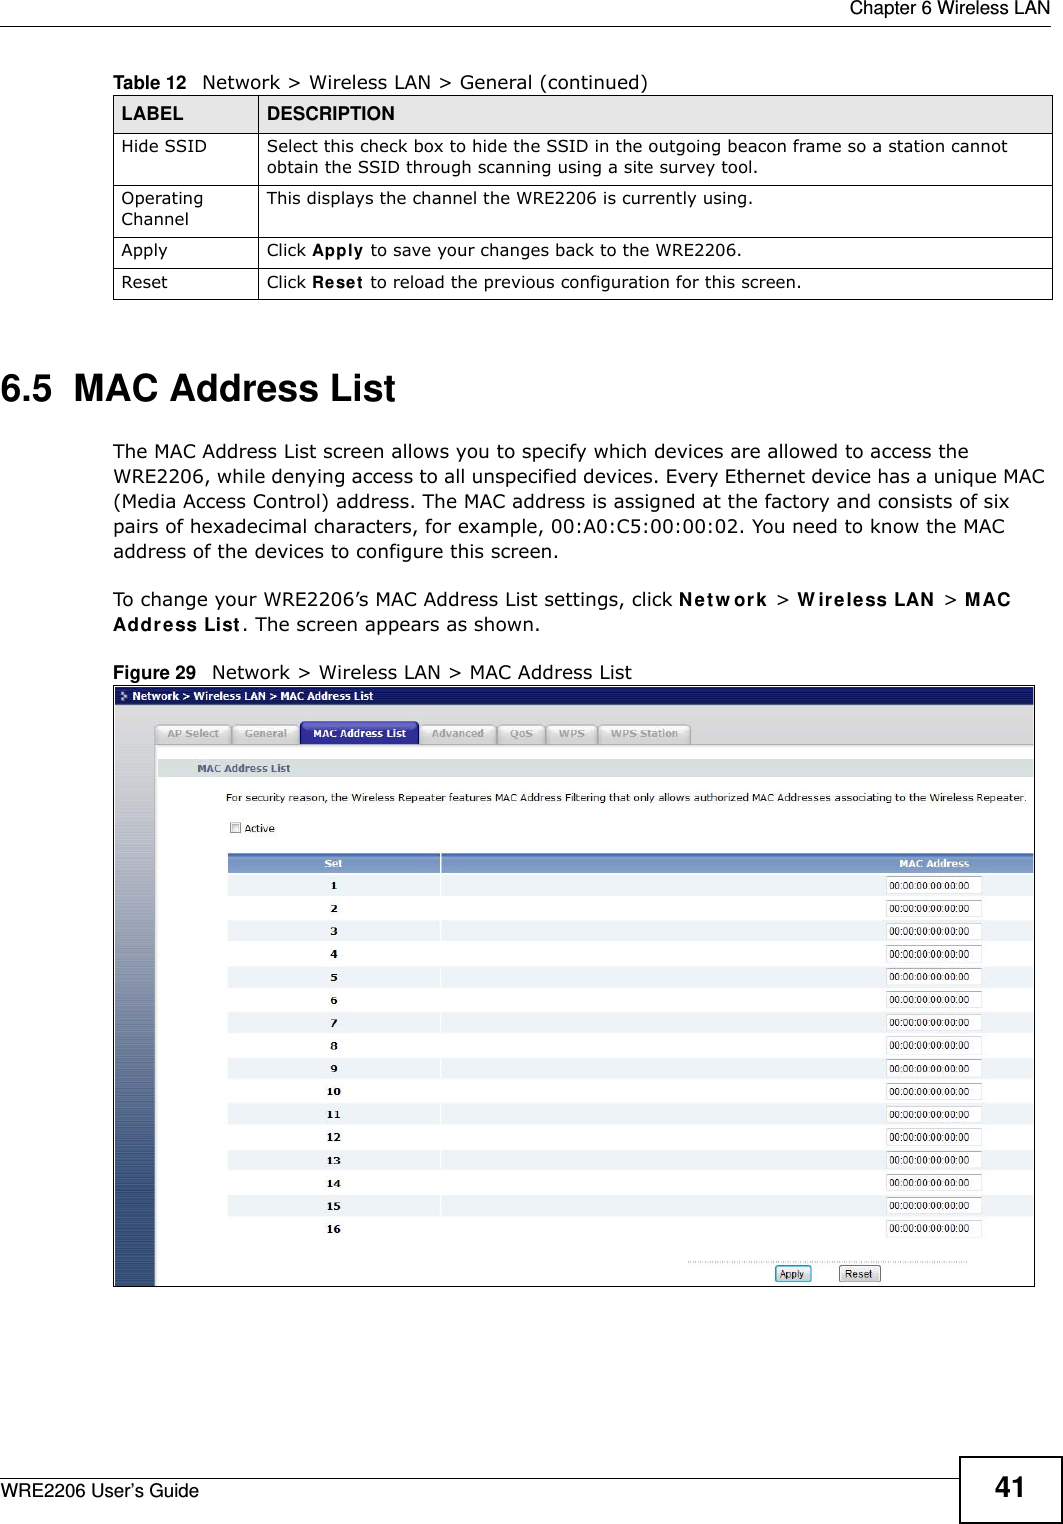  Chapter 6 Wireless LANWRE2206 User’s Guide 416.5  MAC Address ListThe MAC Address List screen allows you to specify which devices are allowed to access the WRE2206, while denying access to all unspecified devices. Every Ethernet device has a unique MAC (Media Access Control) address. The MAC address is assigned at the factory and consists of six pairs of hexadecimal characters, for example, 00:A0:C5:00:00:02. You need to know the MAC address of the devices to configure this screen.To change your WRE2206’s MAC Address List settings, click N e t w or k  &gt; W ir e le ss LAN &gt; M AC Addr ess List. The screen appears as shown.Figure 29   Network &gt; Wireless LAN &gt; MAC Address ListHide SSID Select this check box to hide the SSID in the outgoing beacon frame so a station cannot obtain the SSID through scanning using a site survey tool.Operating Channel This displays the channel the WRE2206 is currently using.Apply Click Apply to save your changes back to the WRE2206.Reset Click Reset  to reload the previous configuration for this screen.Table 12   Network &gt; Wireless LAN &gt; General (continued)LABEL DESCRIPTION